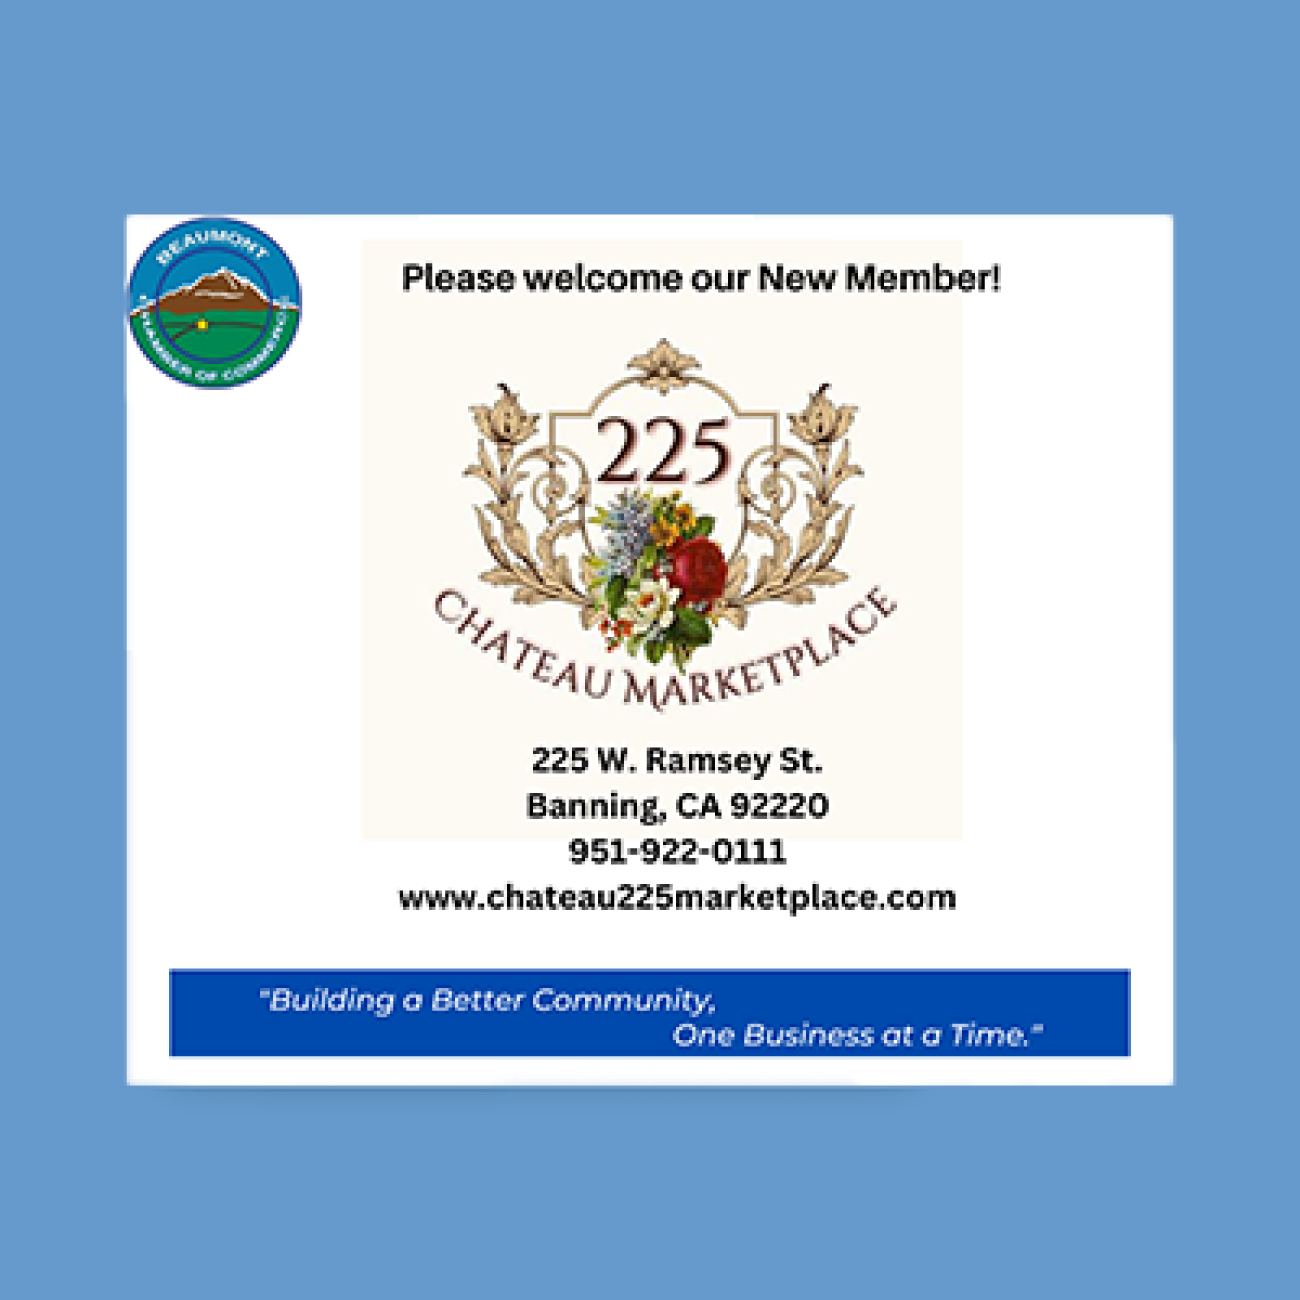 Business Directory - Beaumont Chamber of Commerce